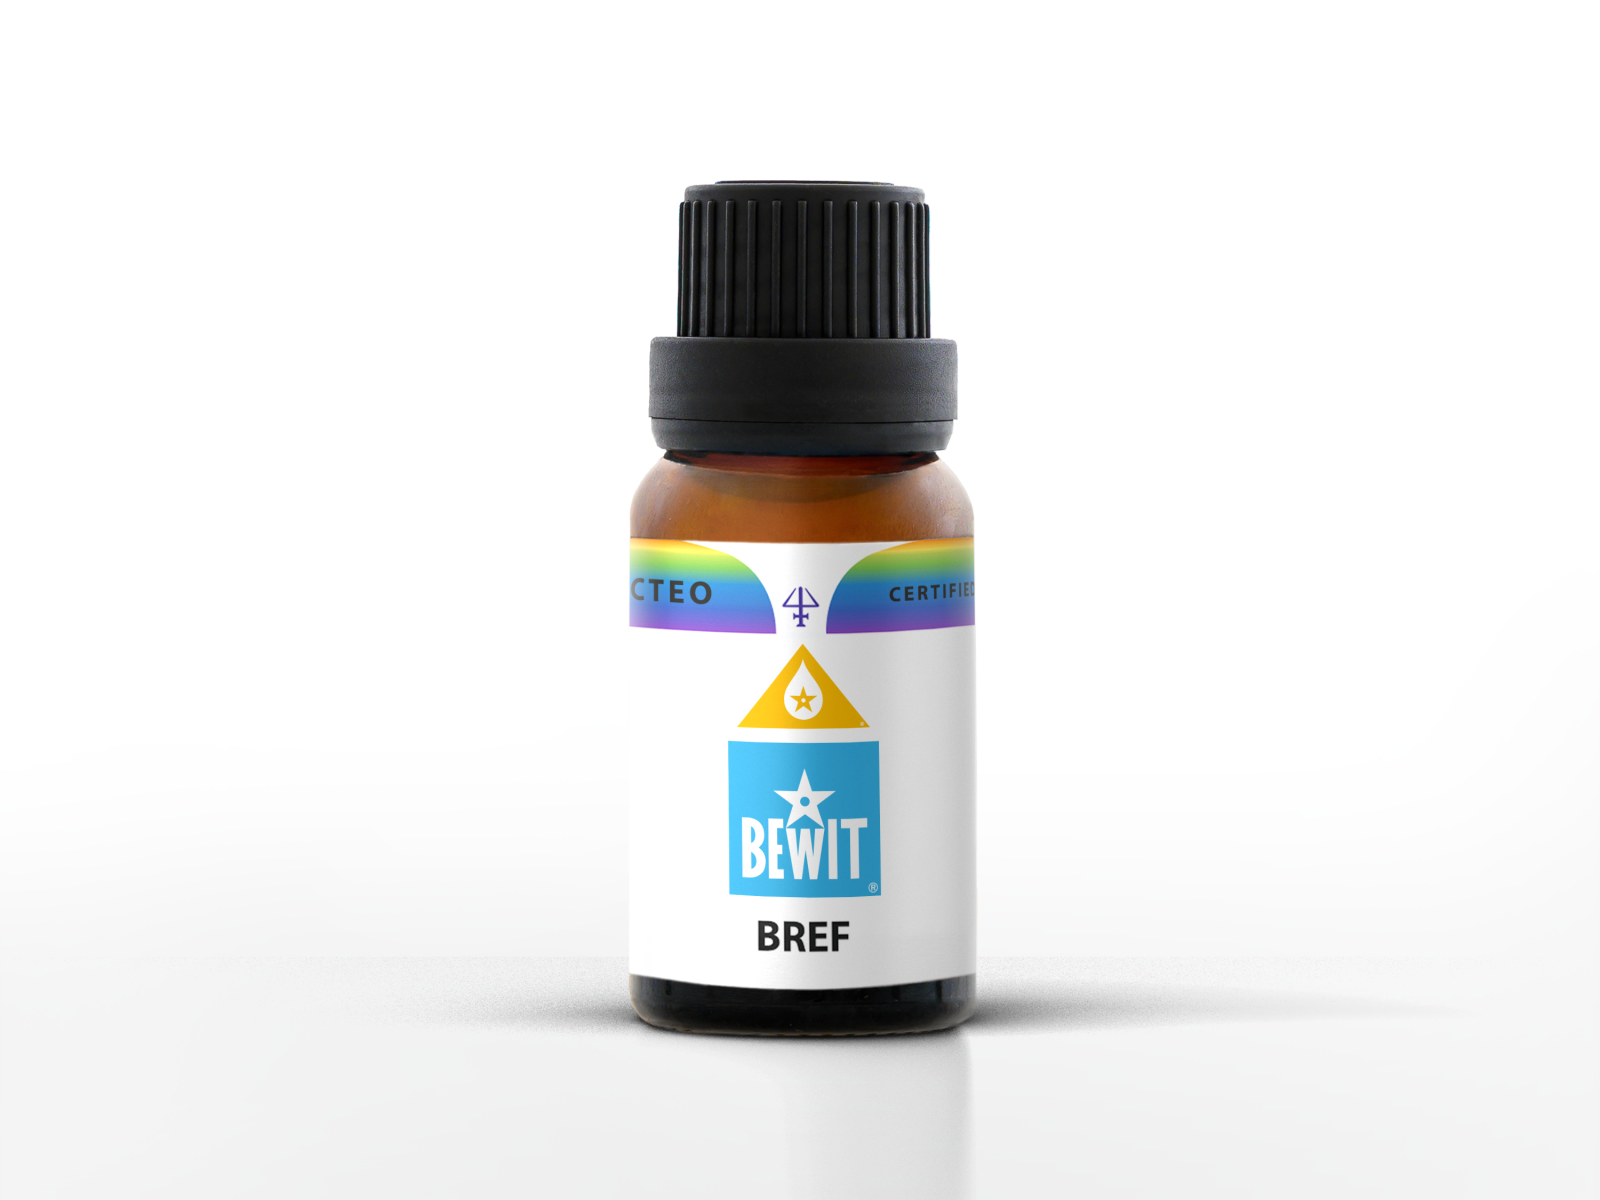 BEWIT BREF - Blend of the essential oils